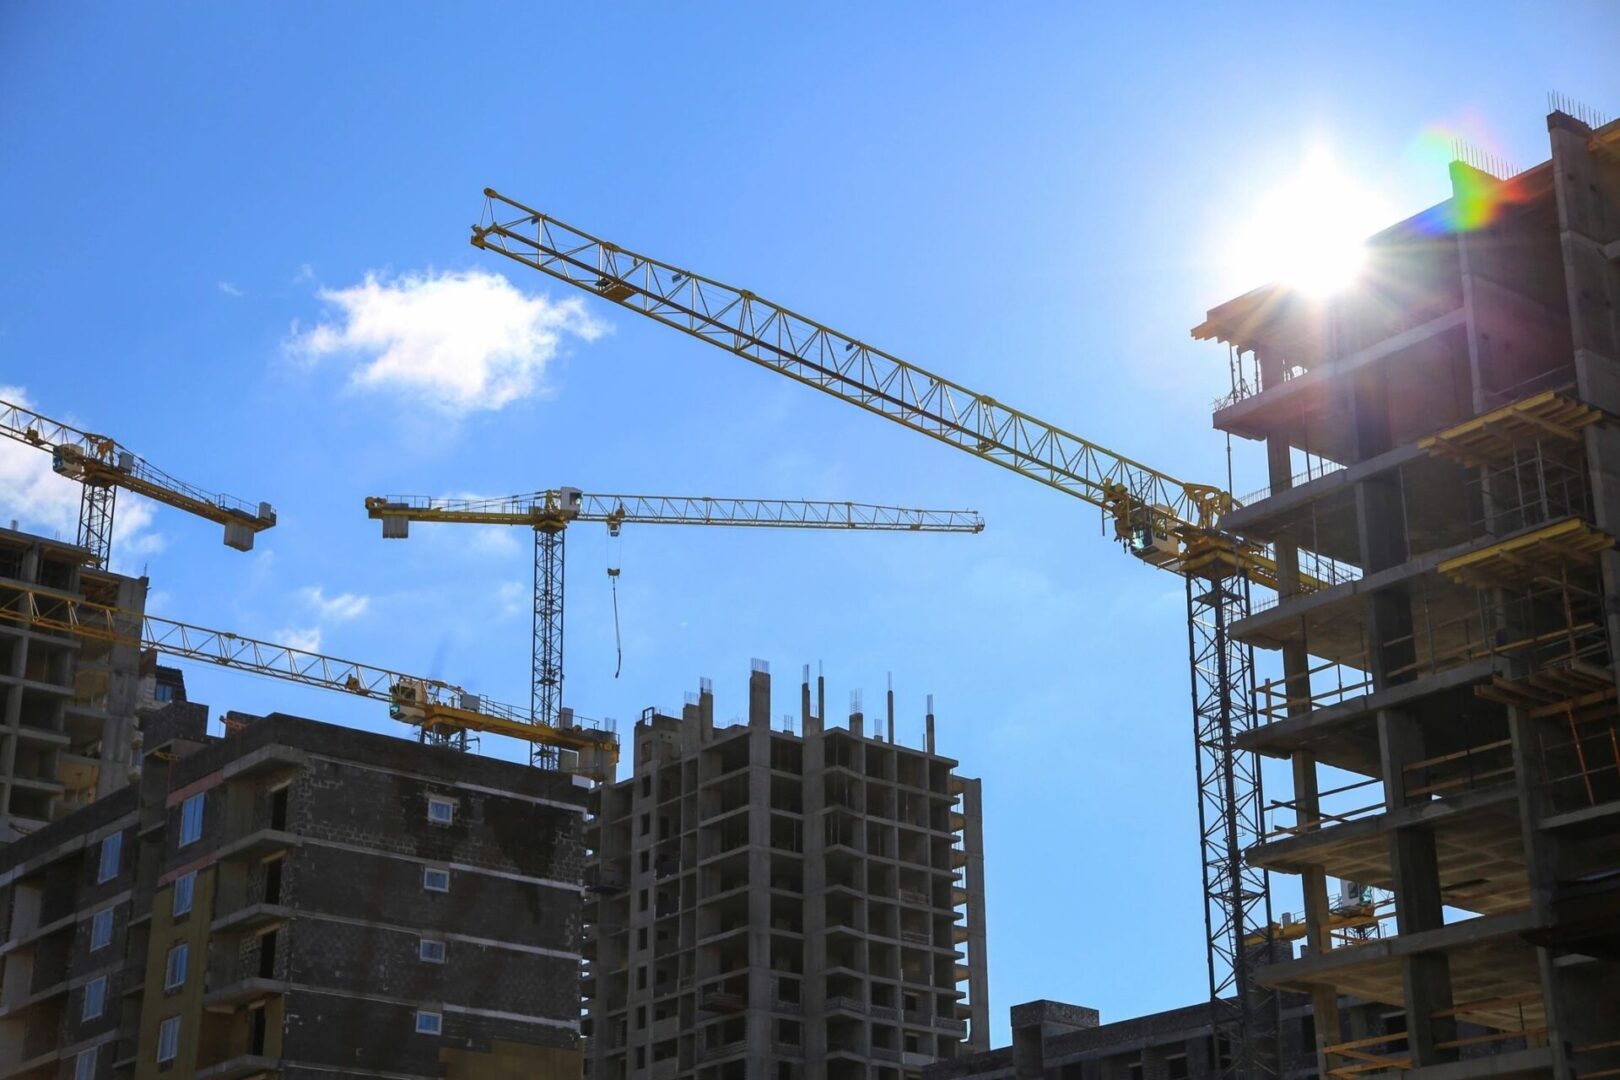 Construction site with multiple cranes and buildings under construction against a clear blue sky.